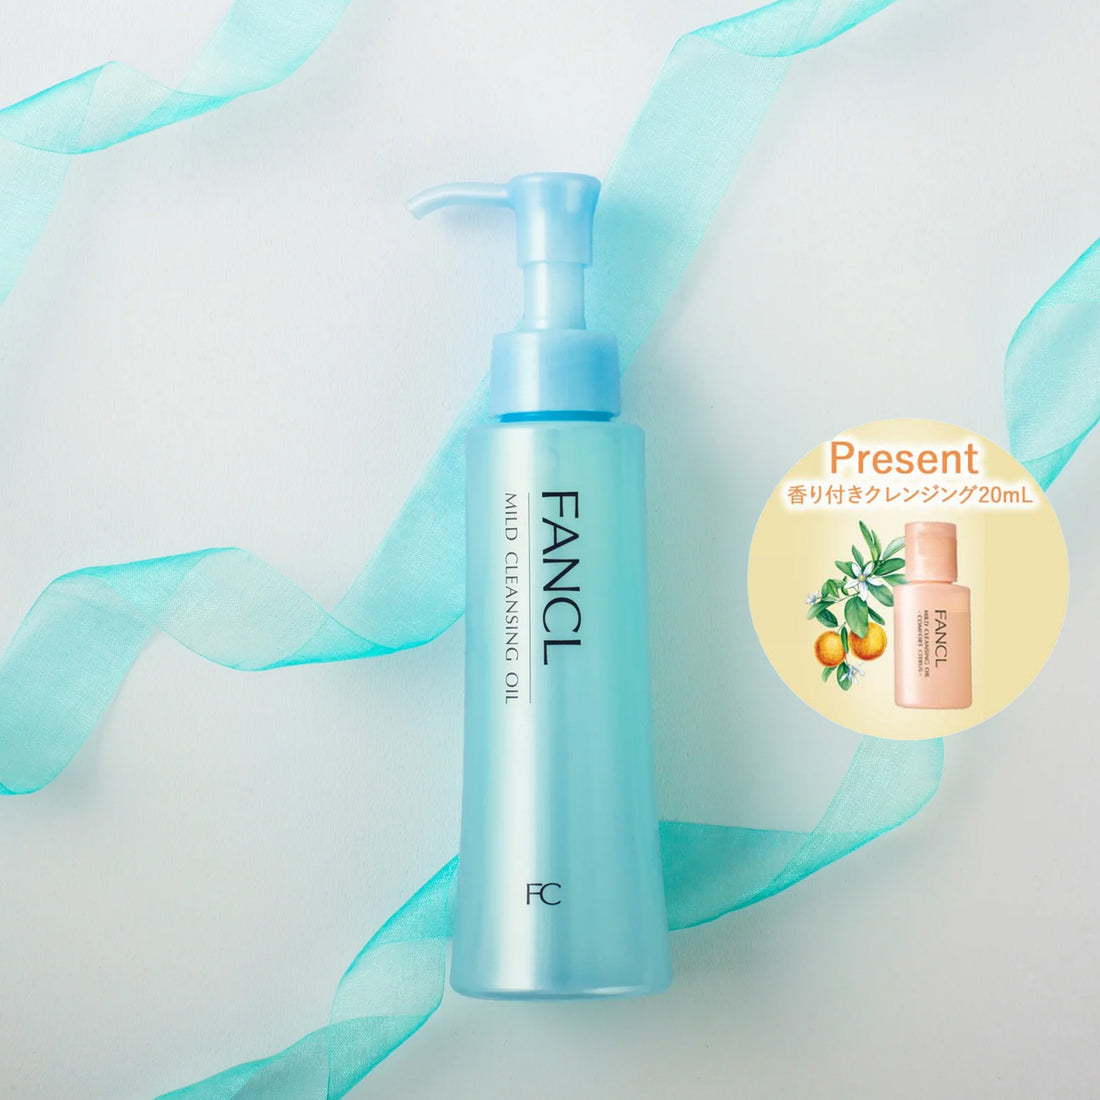 FANCL Mild Cleansing Oil 120ml+ 20ml (Comfortable Citrus) Limited Edition